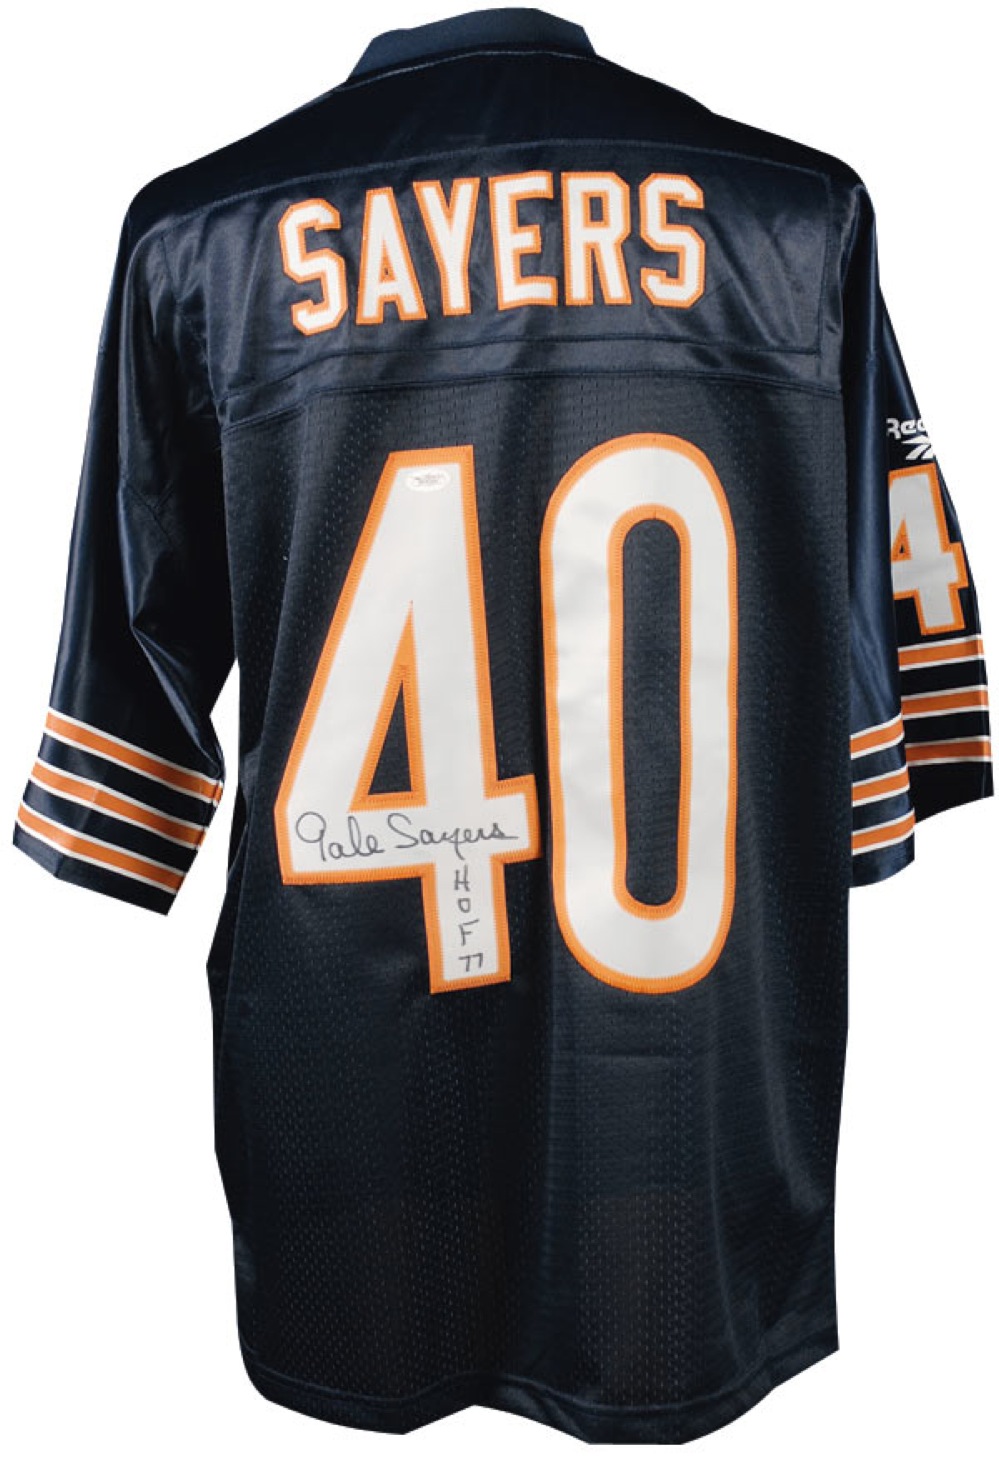 Lot #1384 Gale Sayers